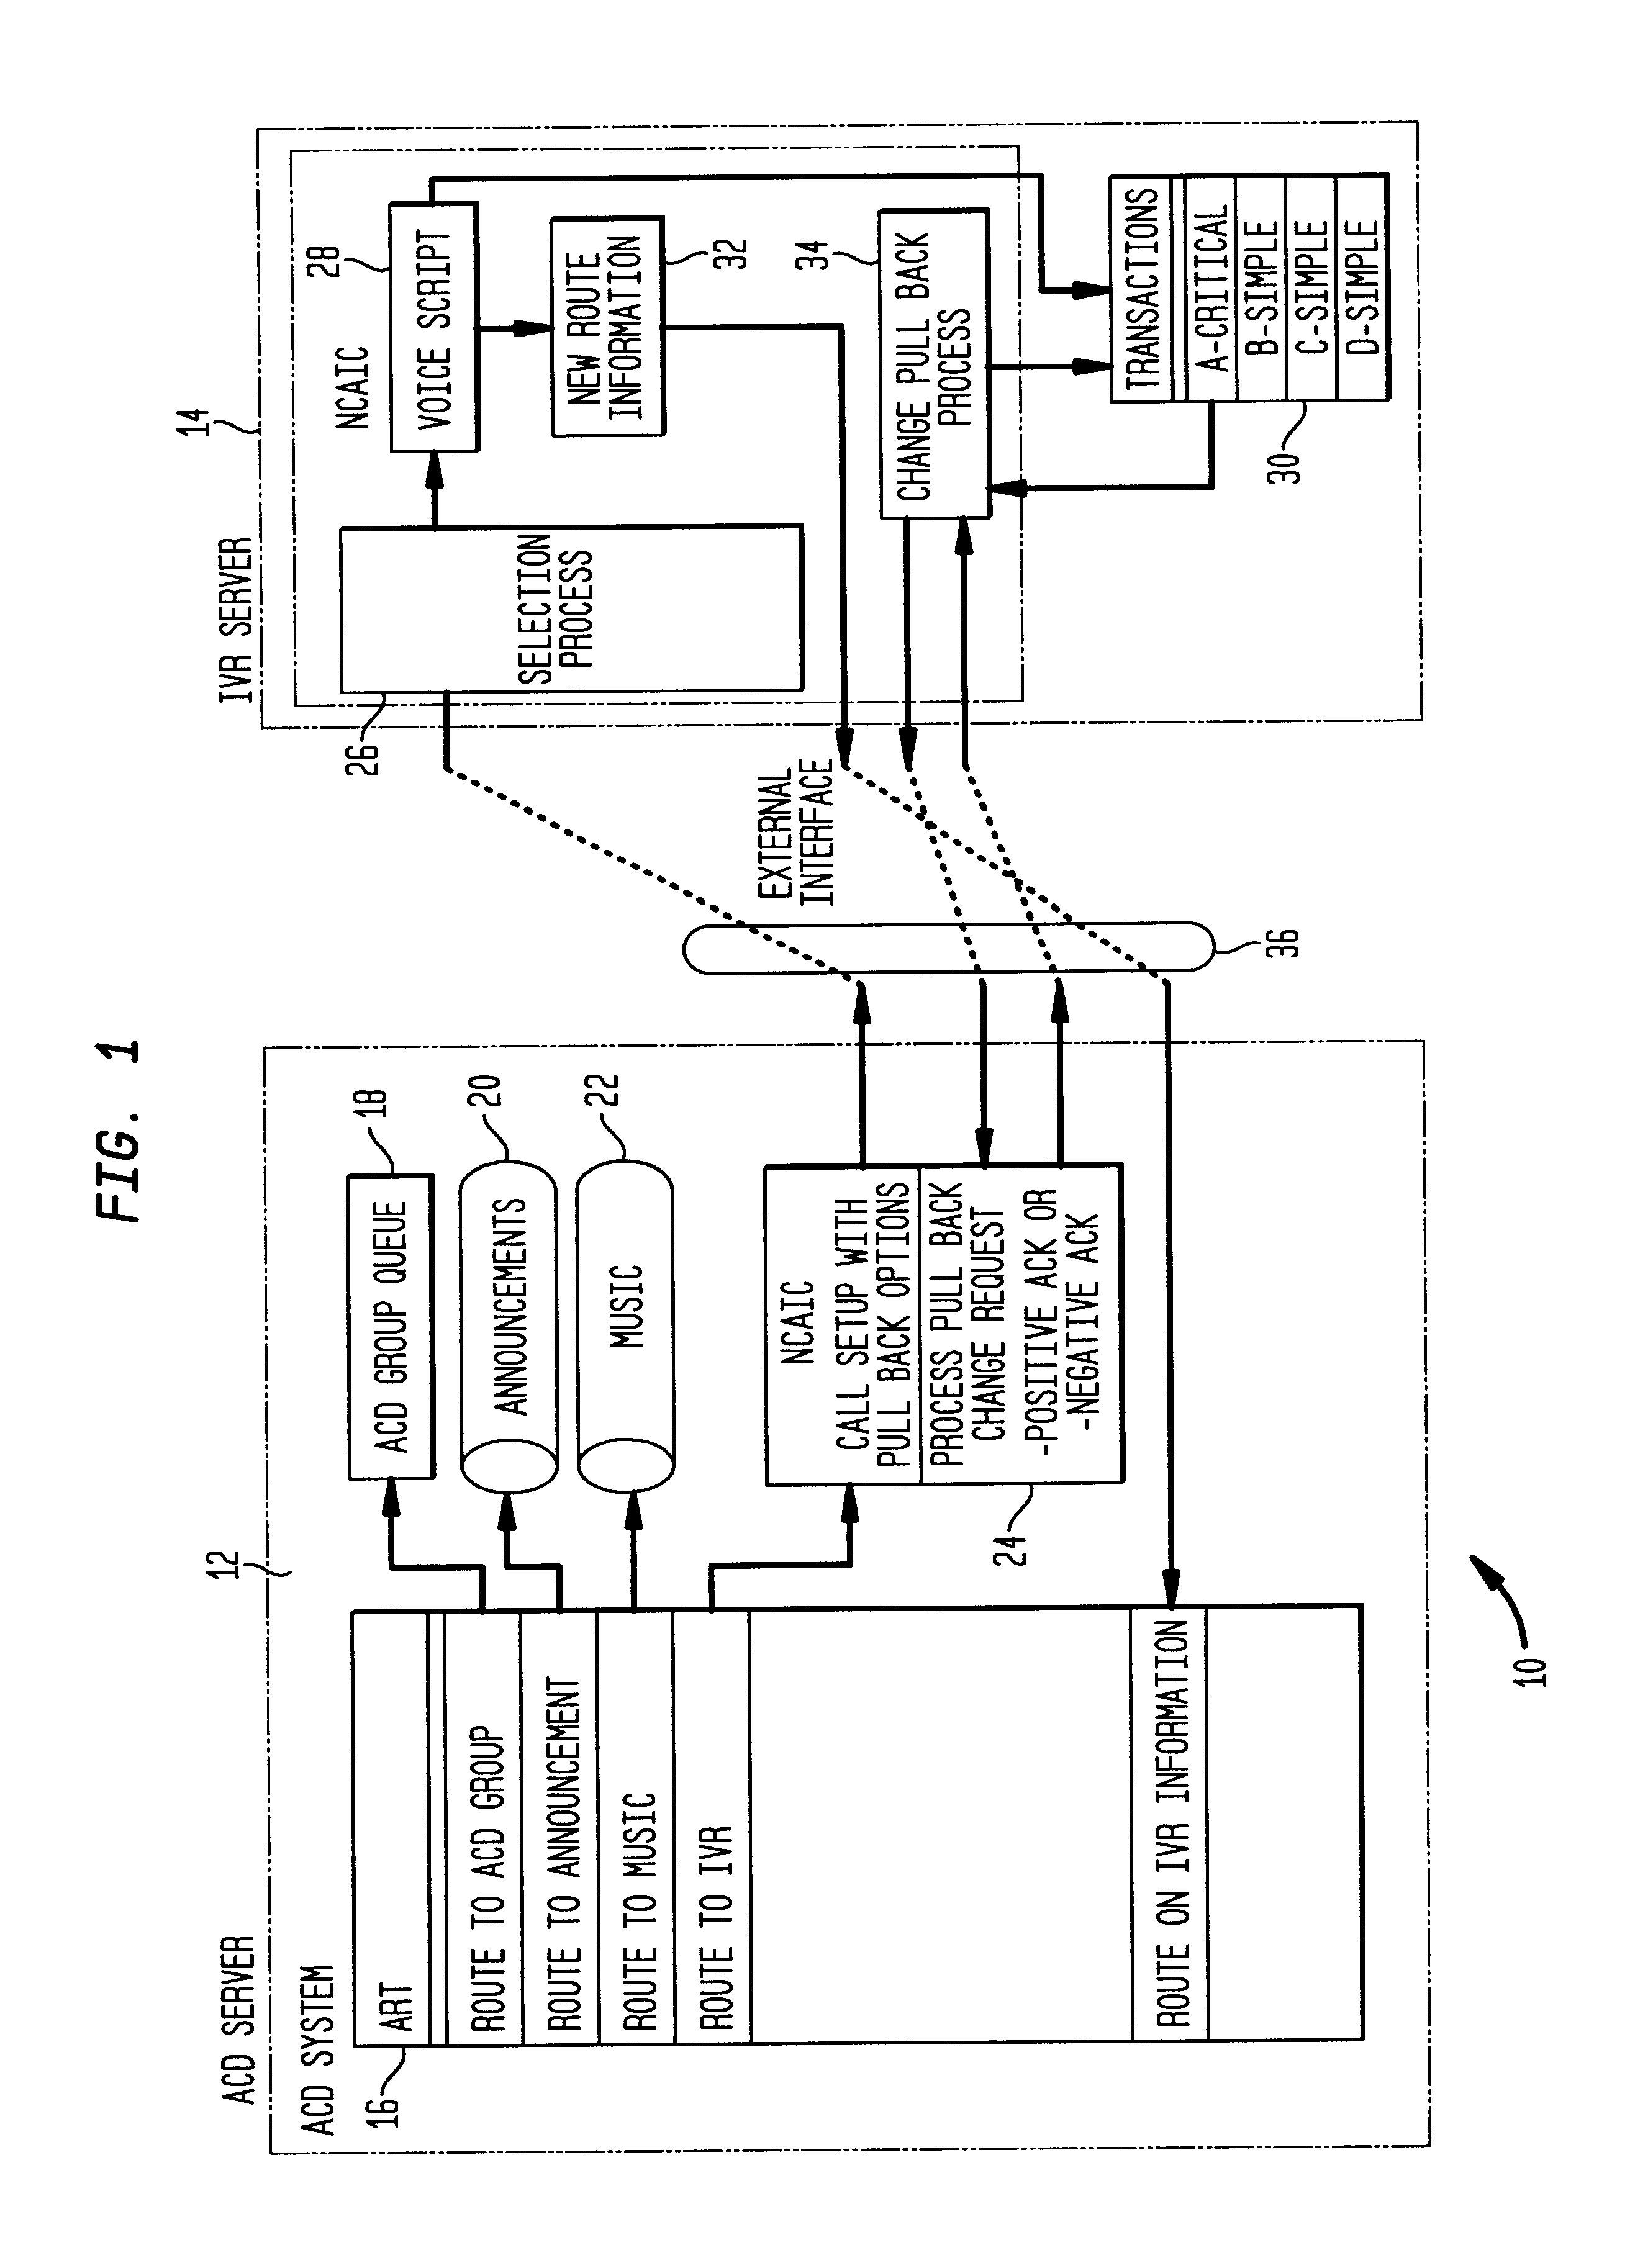 Methods and apparatus for automatically determining a call service request